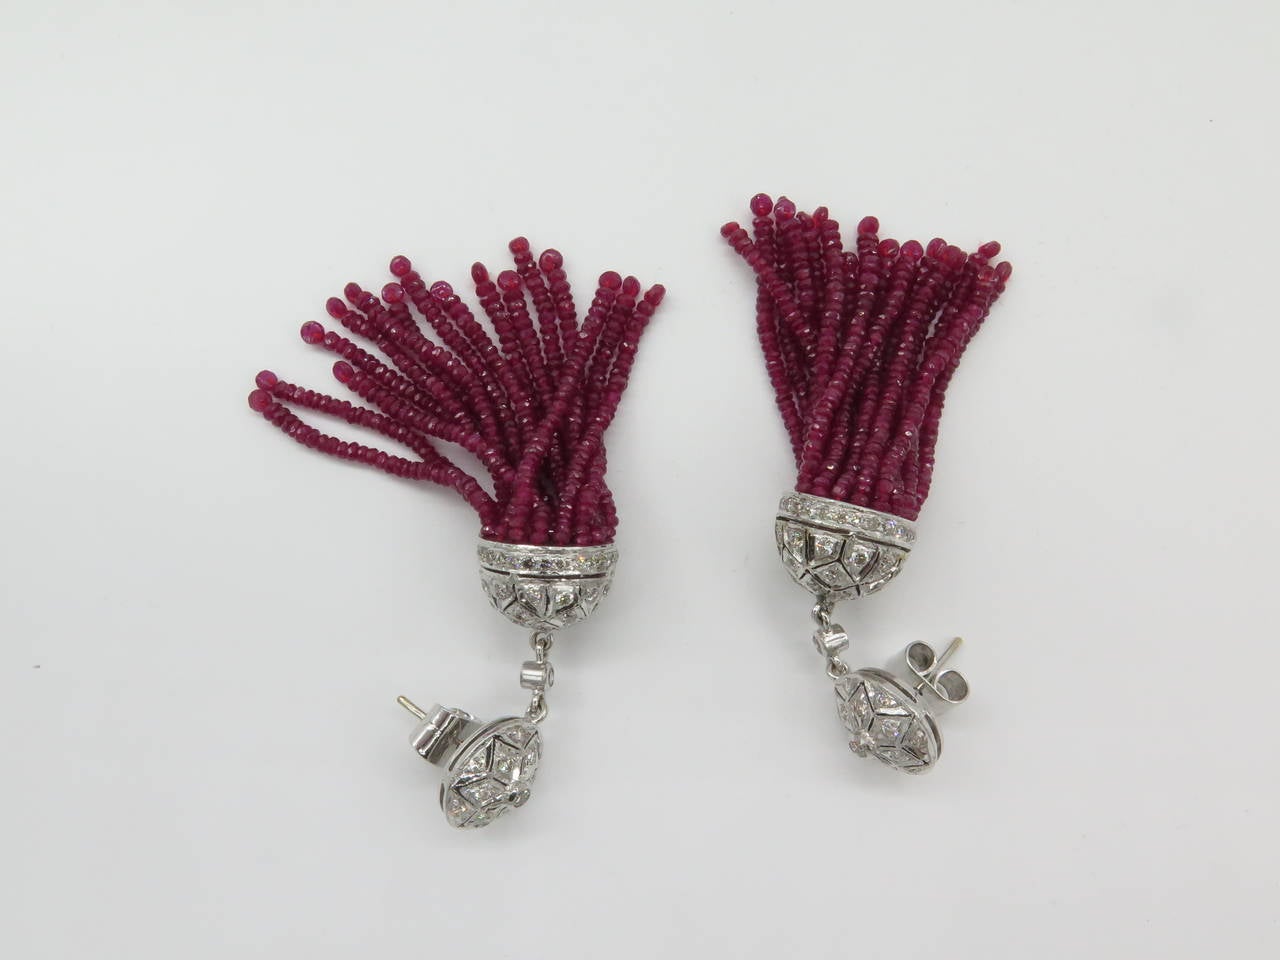 This outstanding 100.72 carats Genuine Burma Rubies bead tassel earring set in 18K white gold forming a cascade, creates a captivating sculptural jewel, with Ice Diamond on top. Wear them to your next event. Total Length:3 inches. totaling white